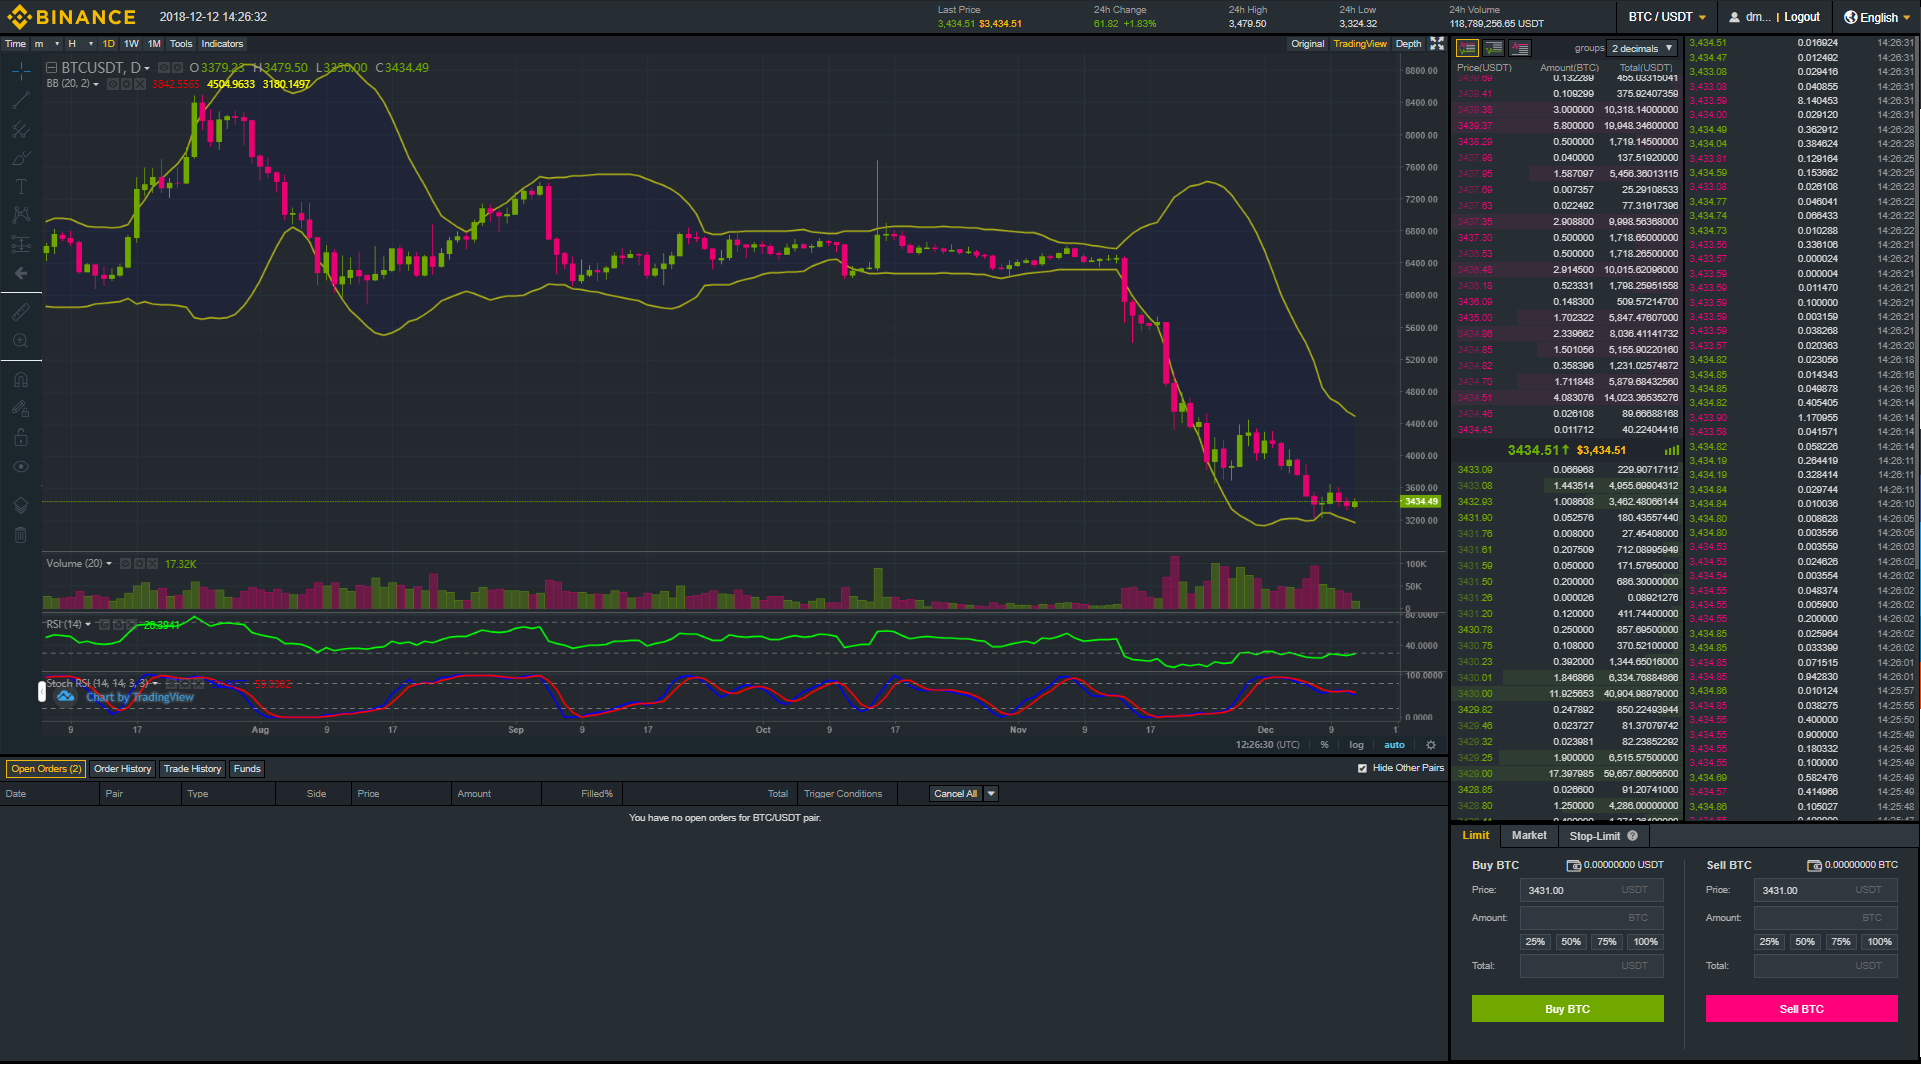 Snapshot of the advanced user interface for trading at Binance 